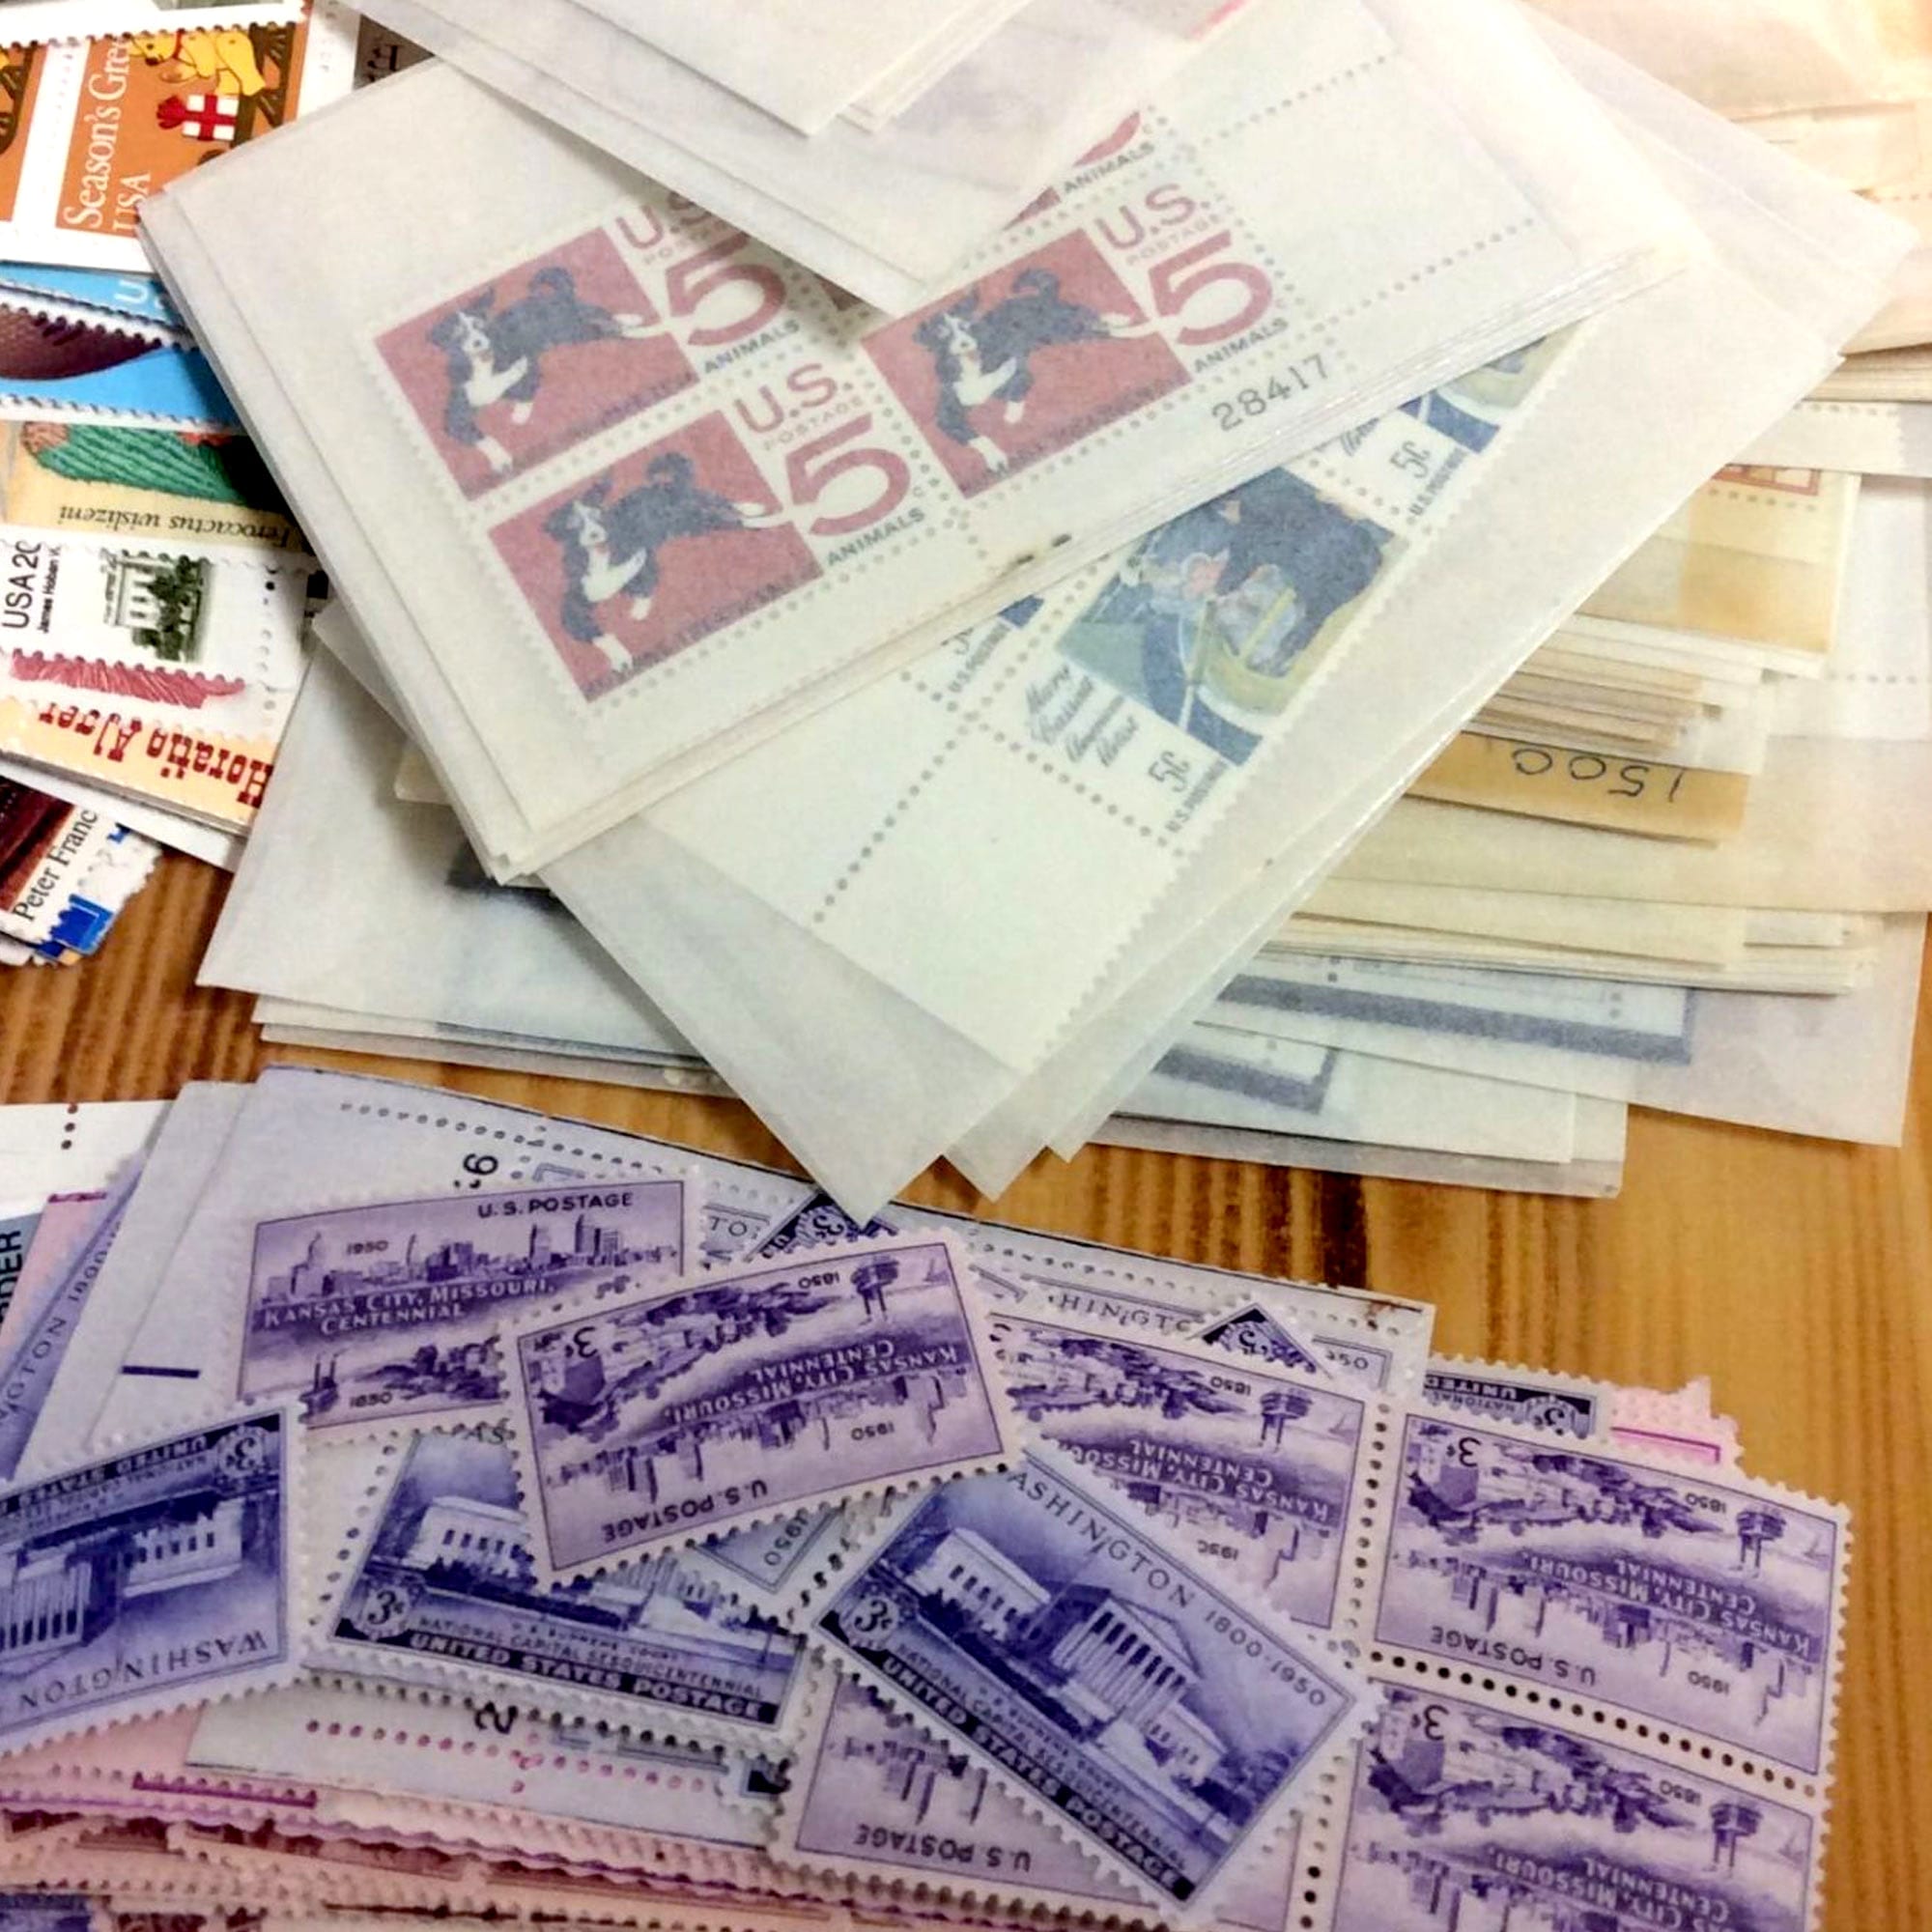 Sell Unused Stamps - Get Cash For Your Unused Postage Stamps